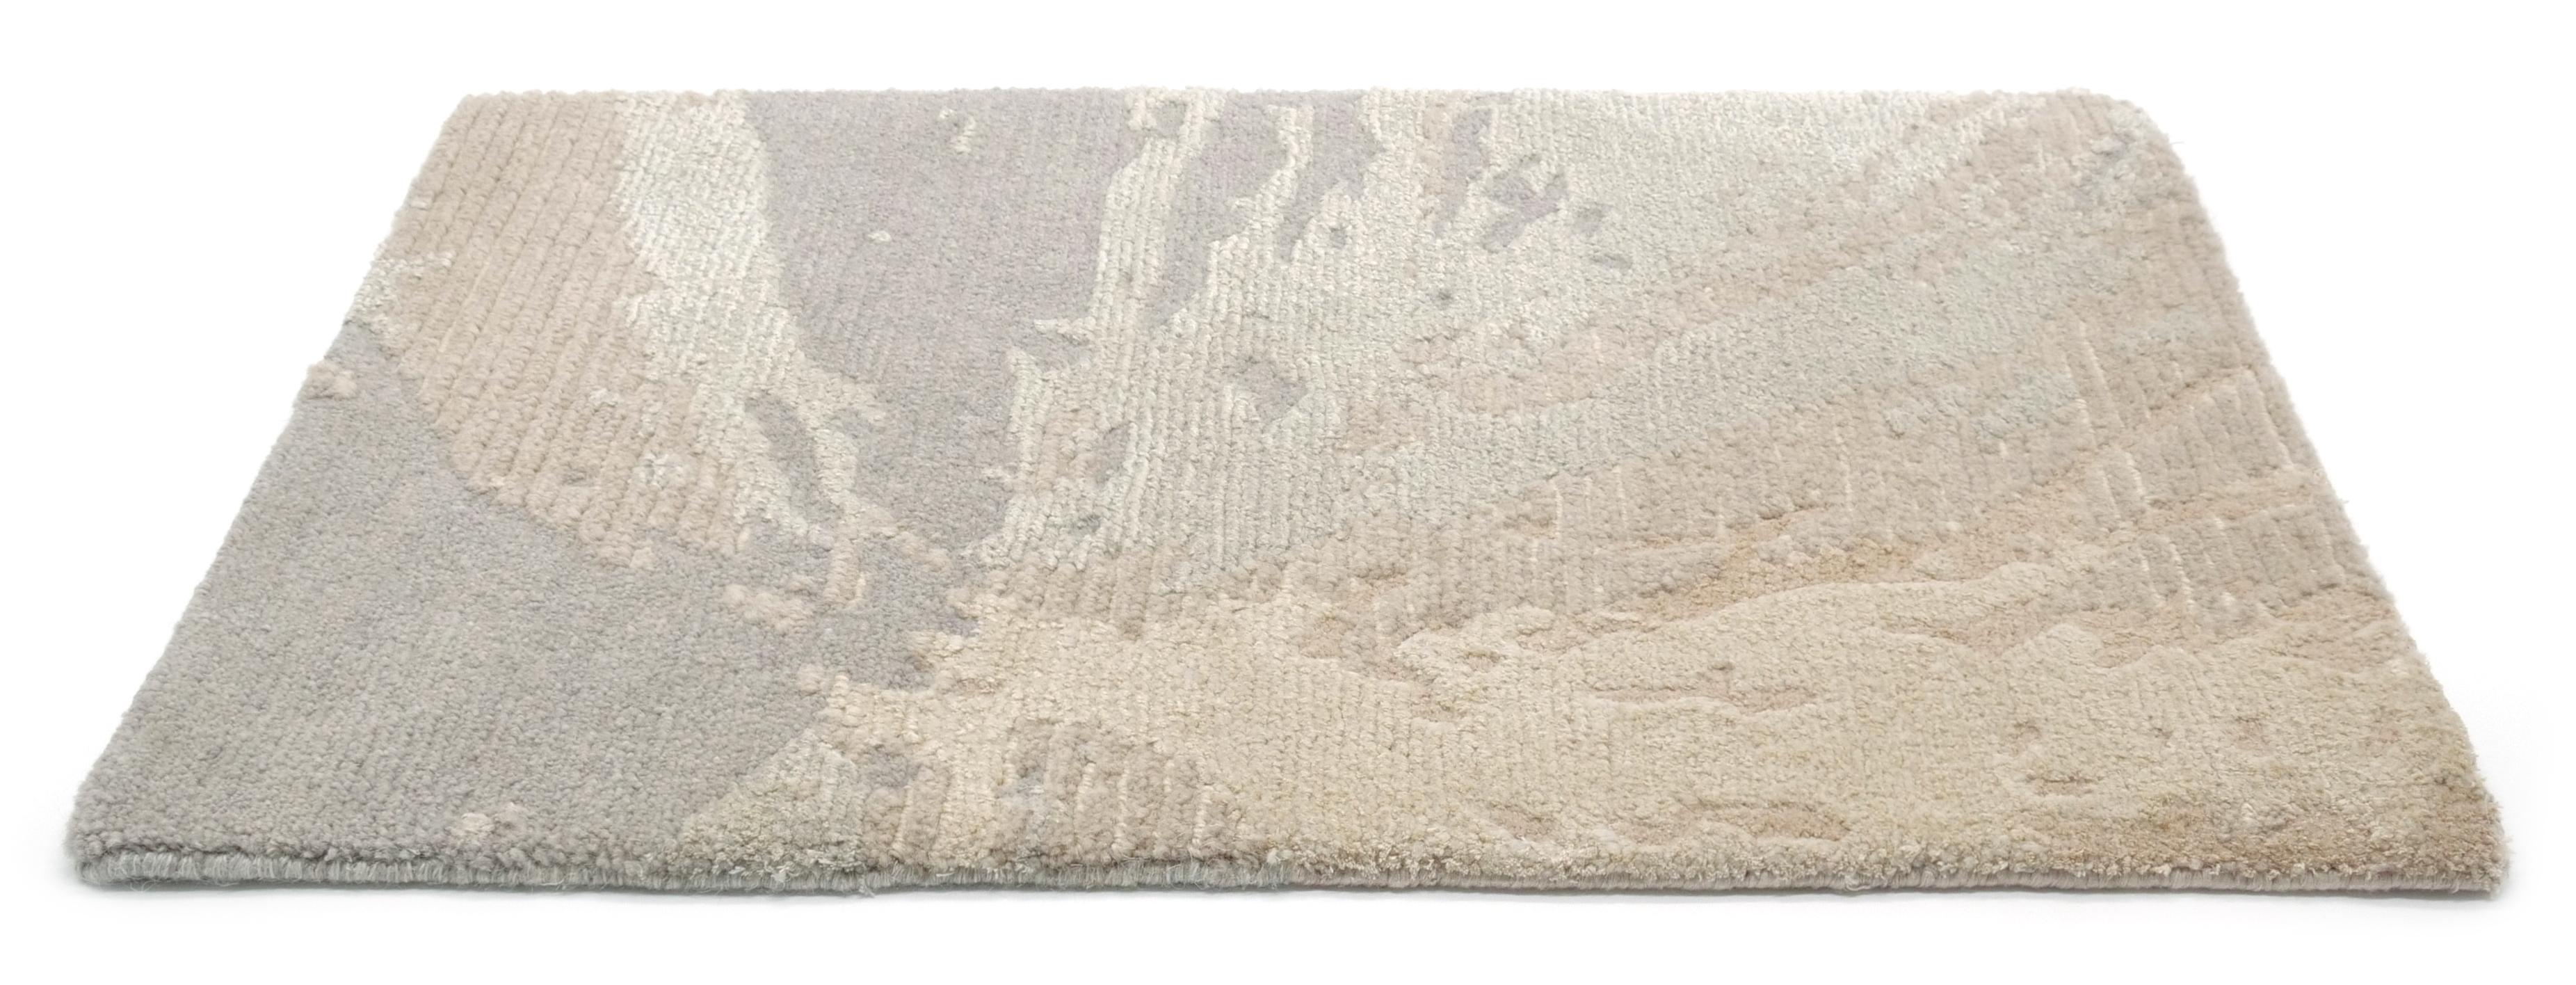 White Contemporary Rug Wool Blend-Silk, Multani Clay, Large, in Stock For Sale 1